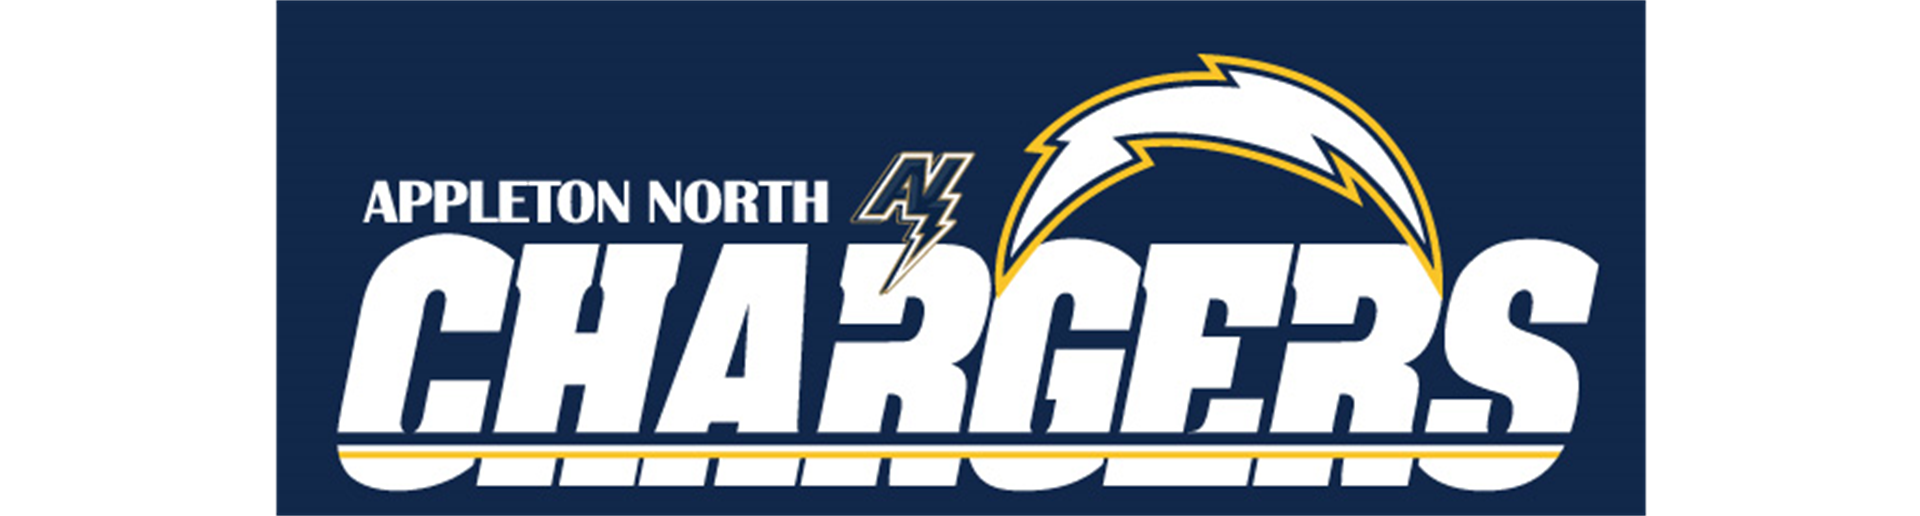 Appleton North Chargers